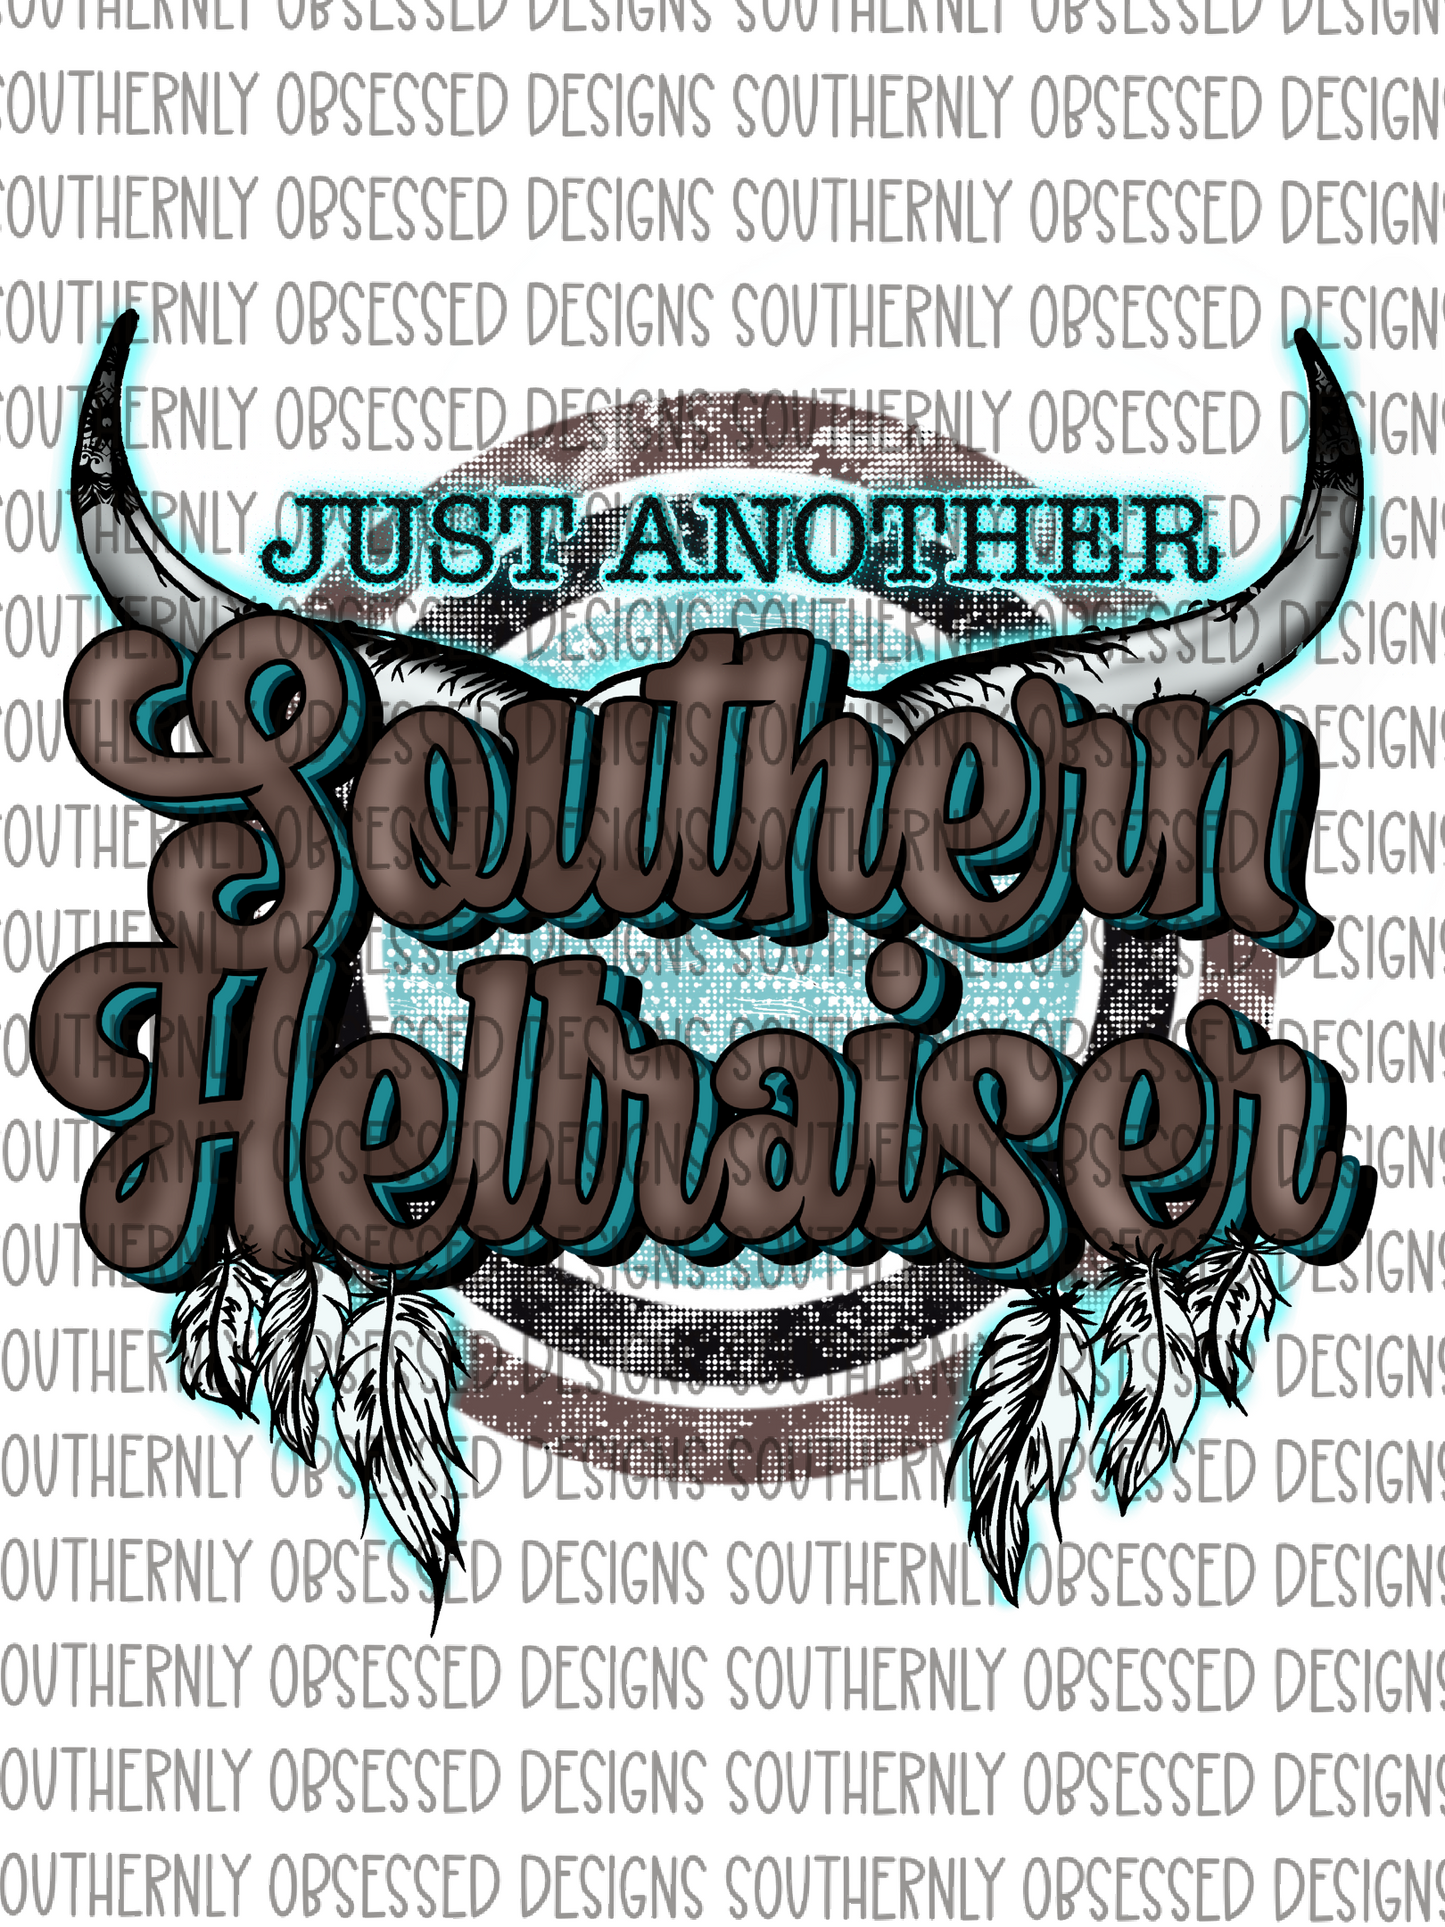 Just Another Southern Hellraiser